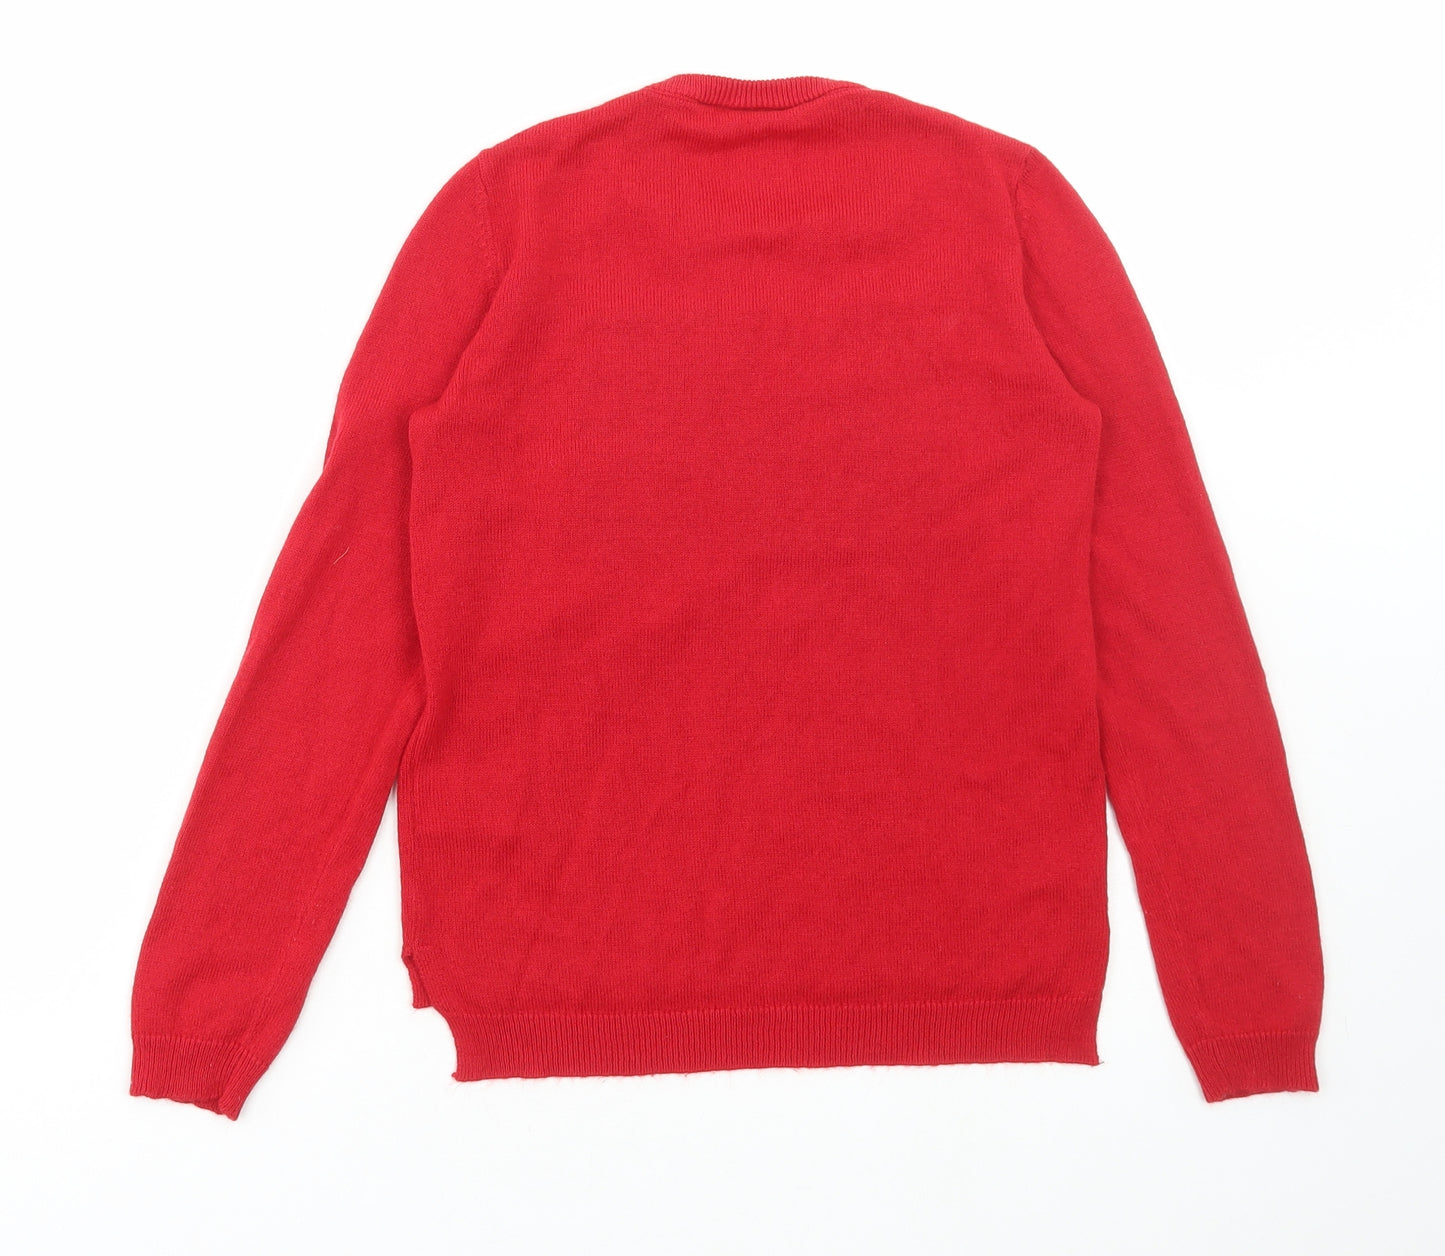 pepperts Girls Red Round Neck Polyacrylate Fibre Pullover Jumper Size 10-11 Years Pullover - Santa Baby